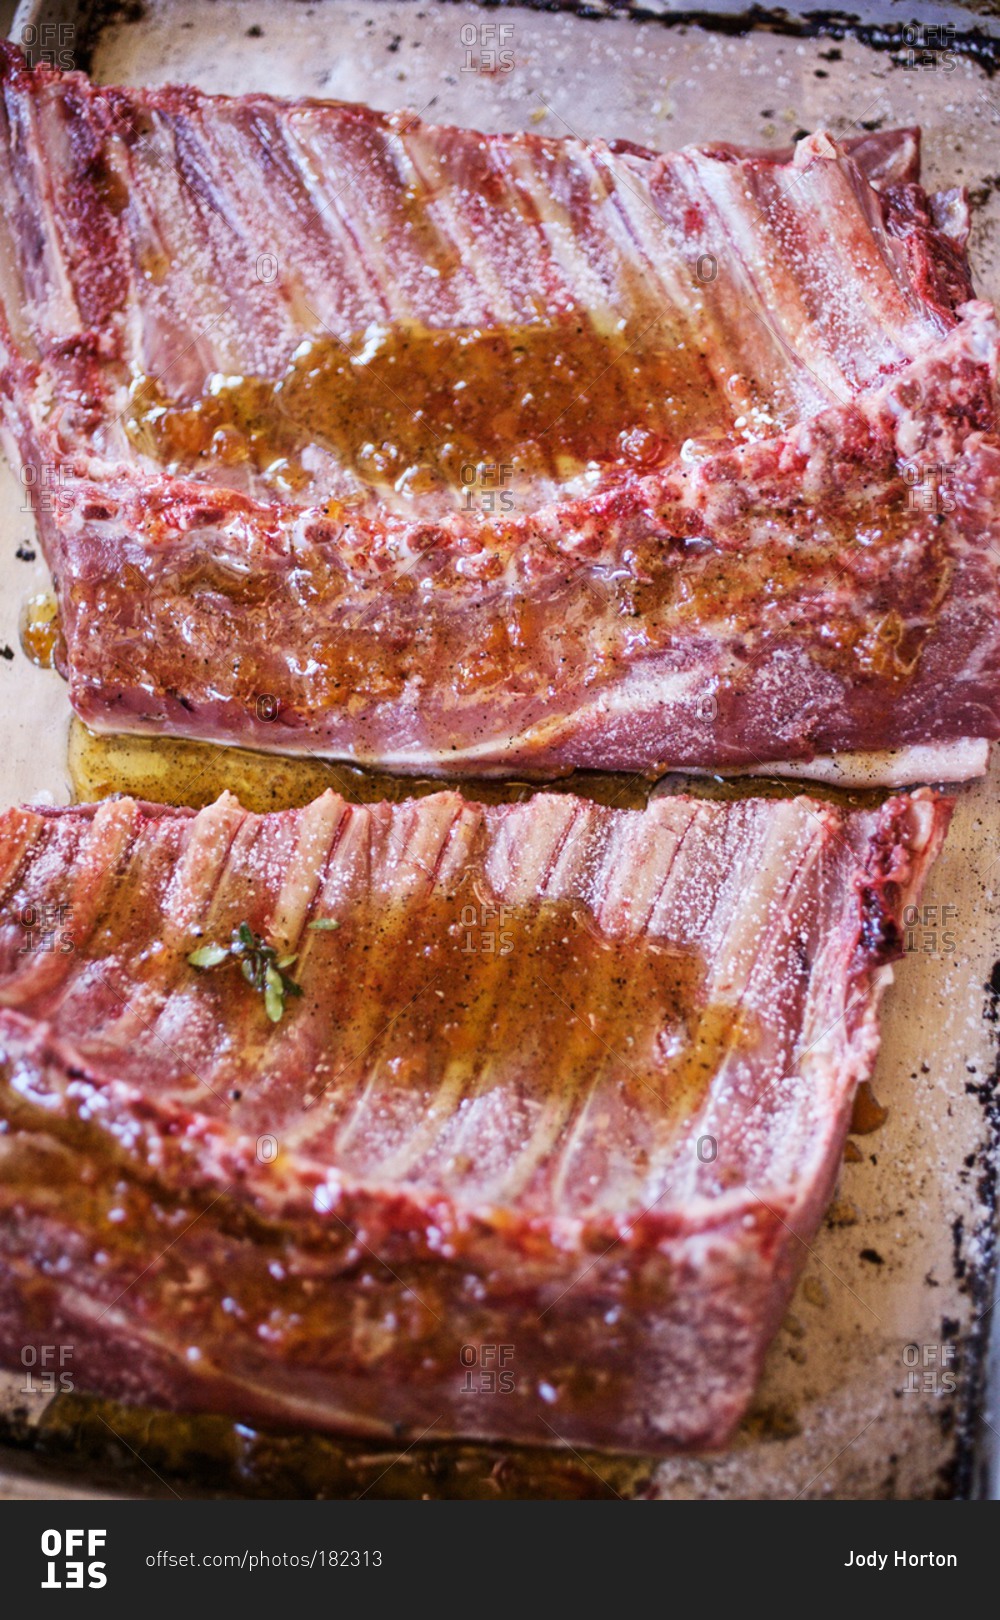 Wild boar ribs drizzled with olive oil